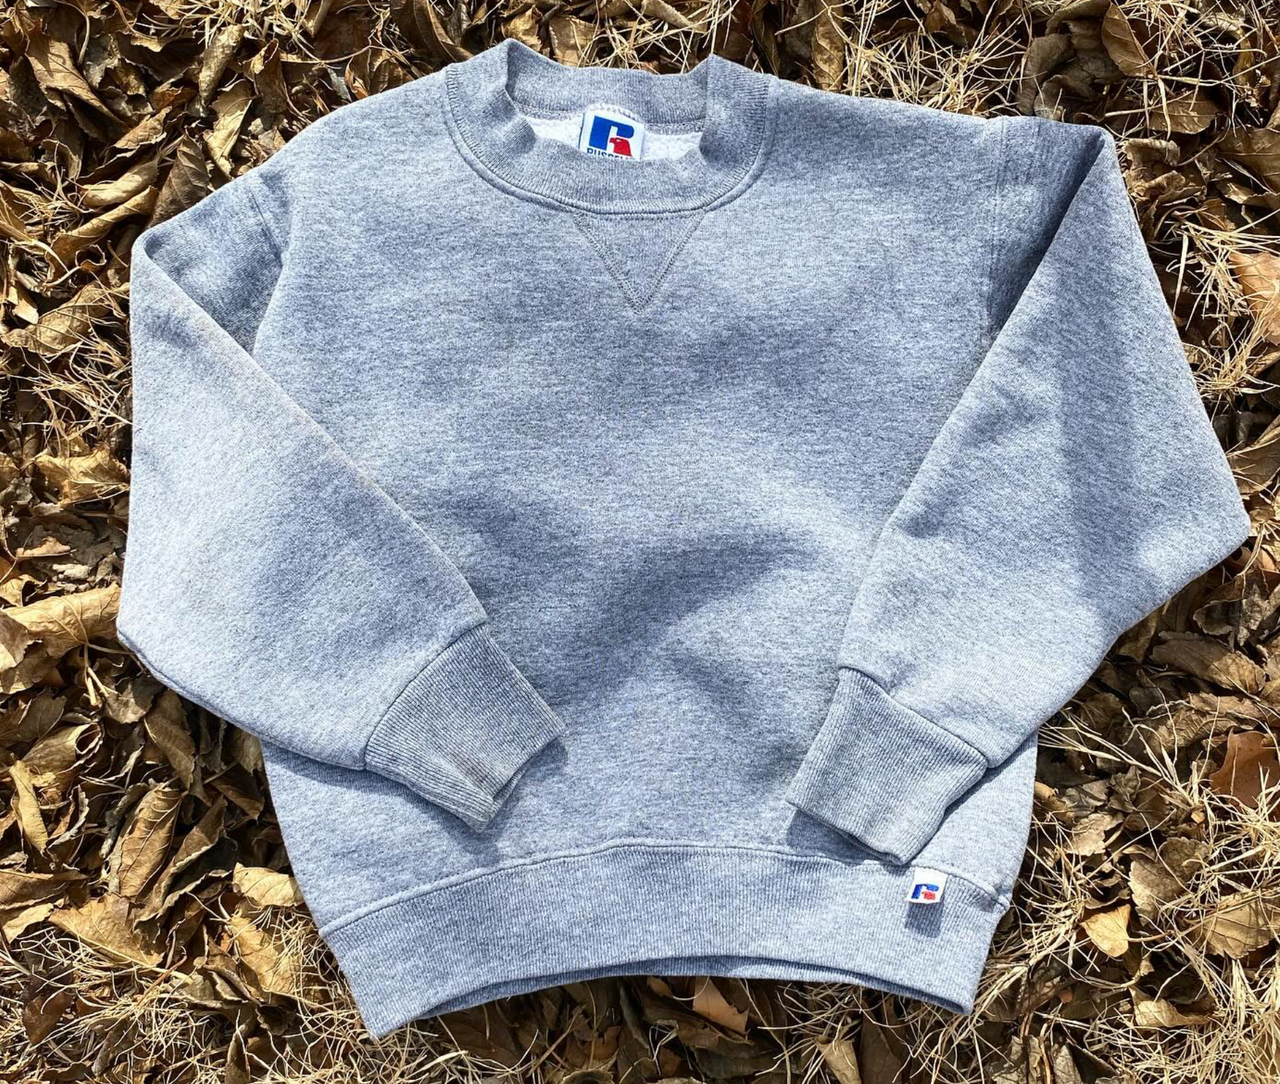 Apple Vintage - Apparel - Russell Athletic Grey Sweater